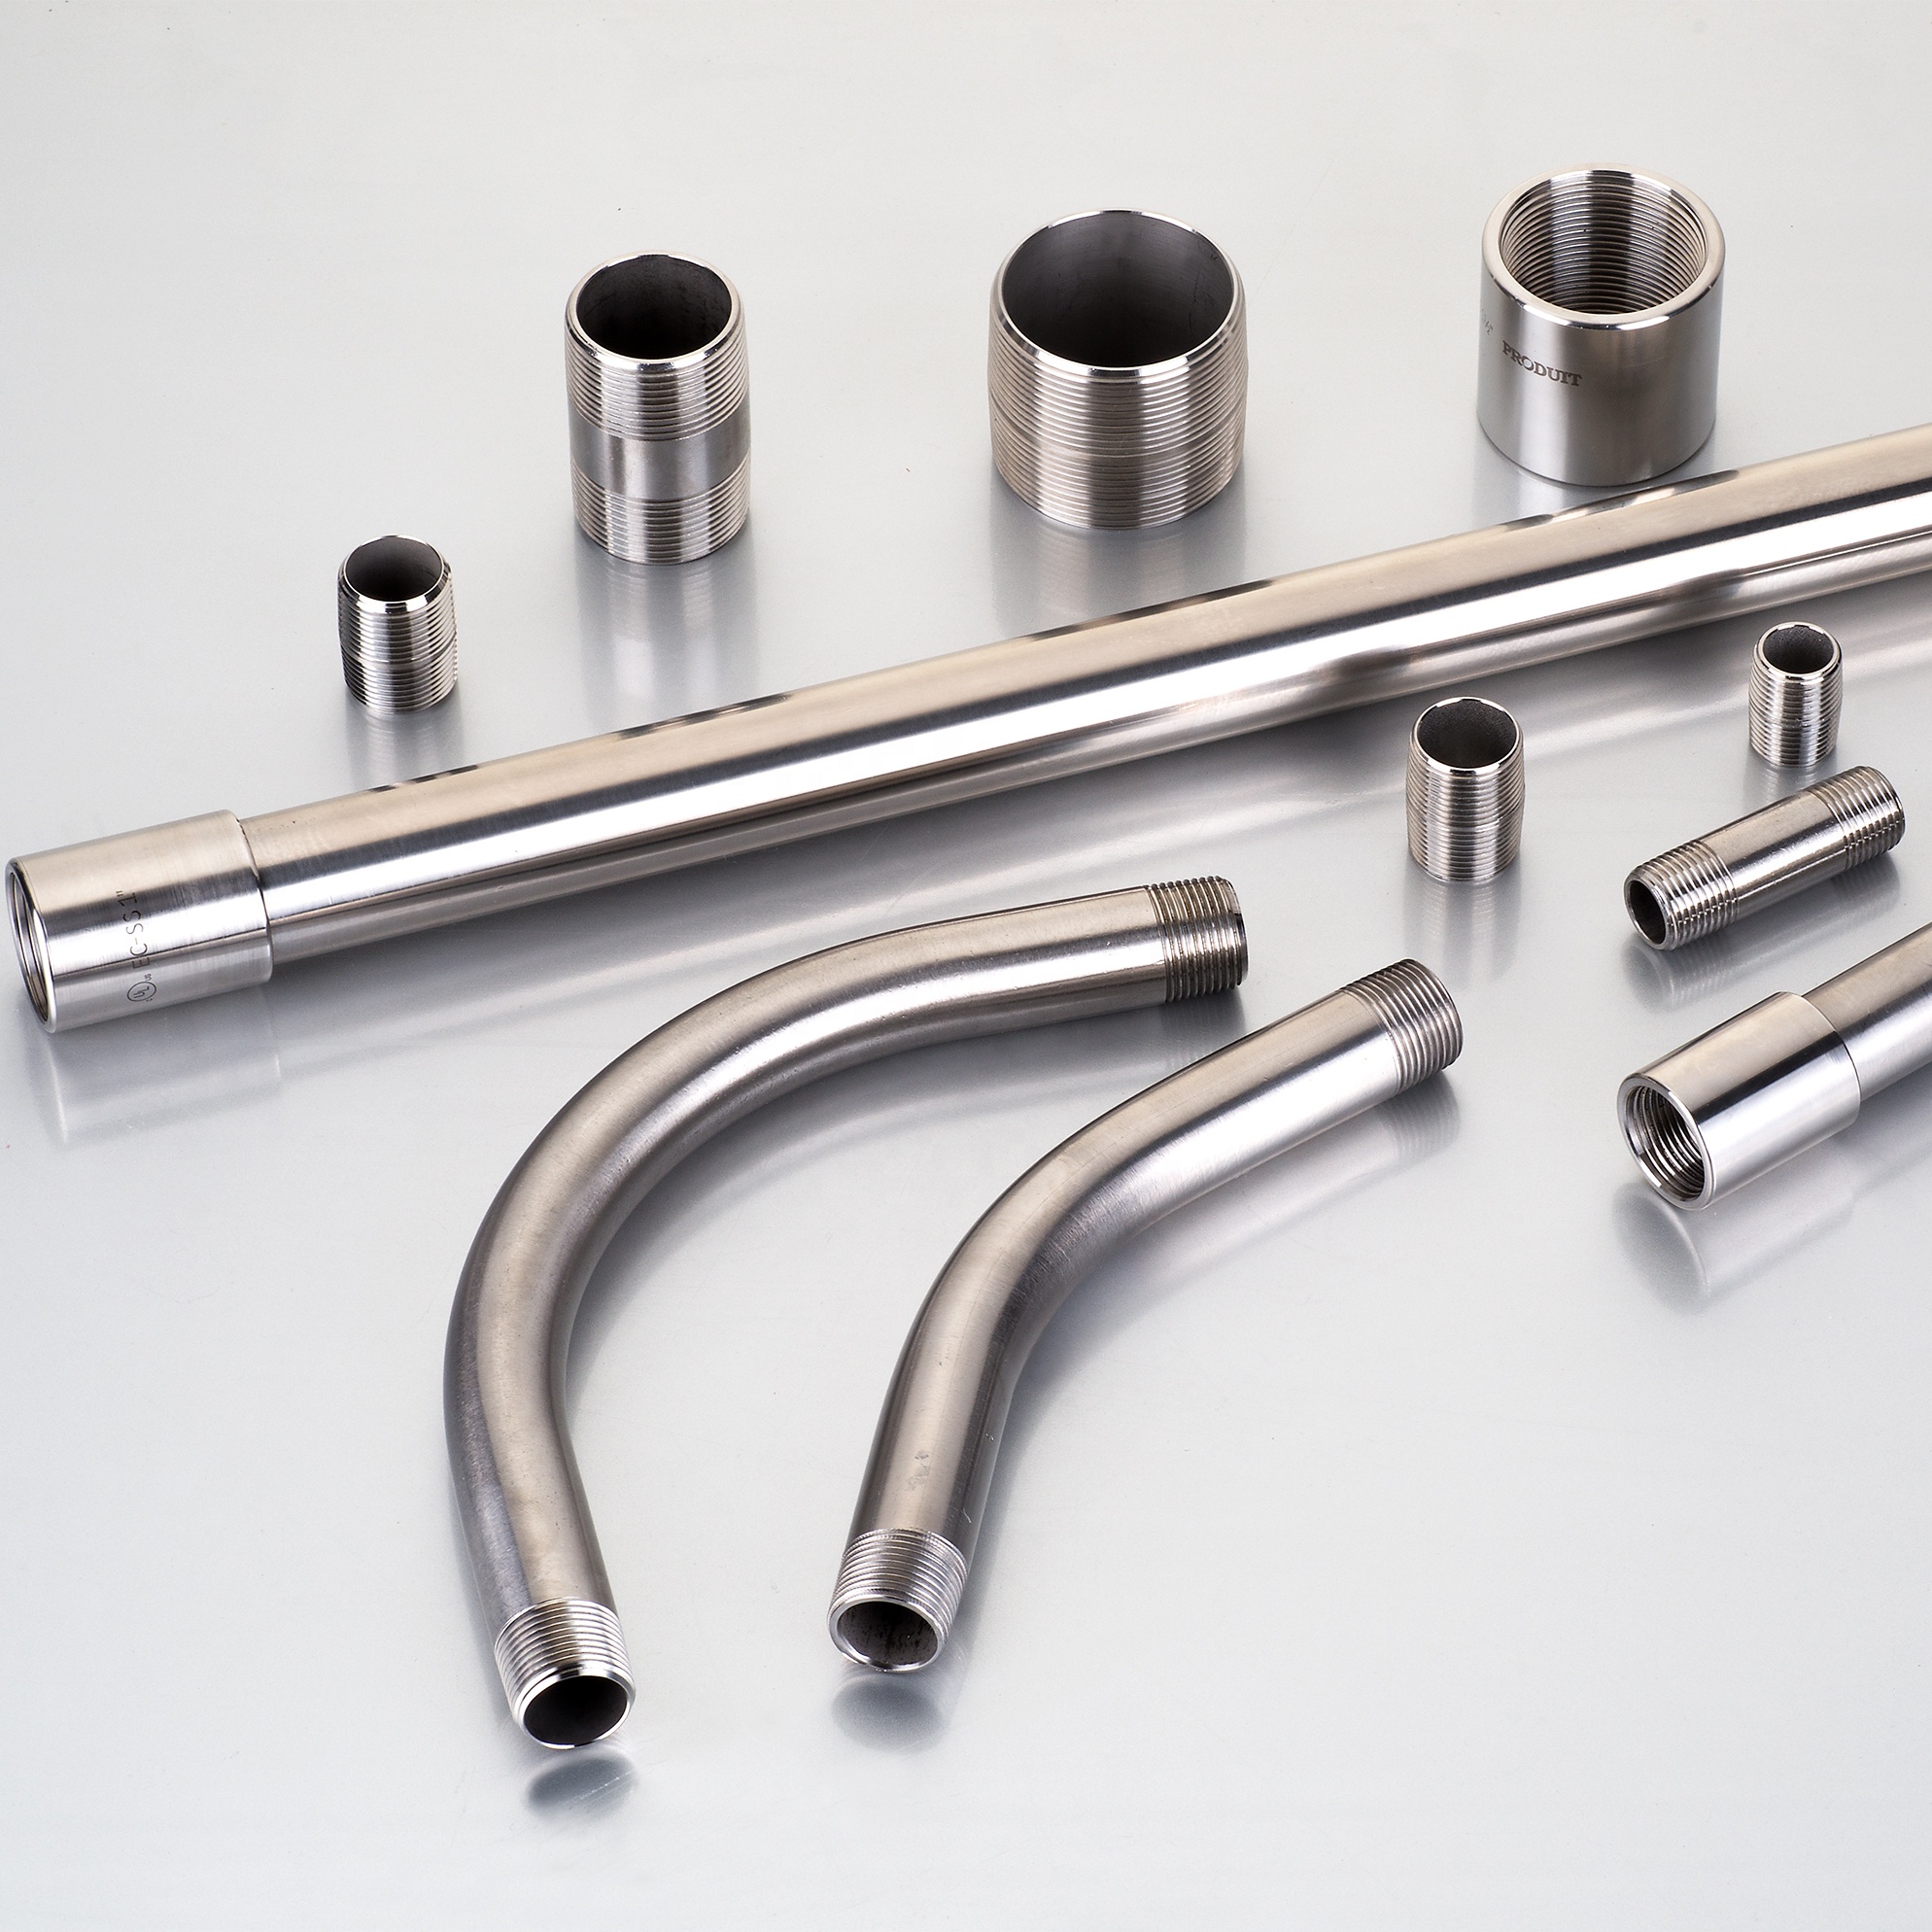 Advantages of choosing stainless steel conduit